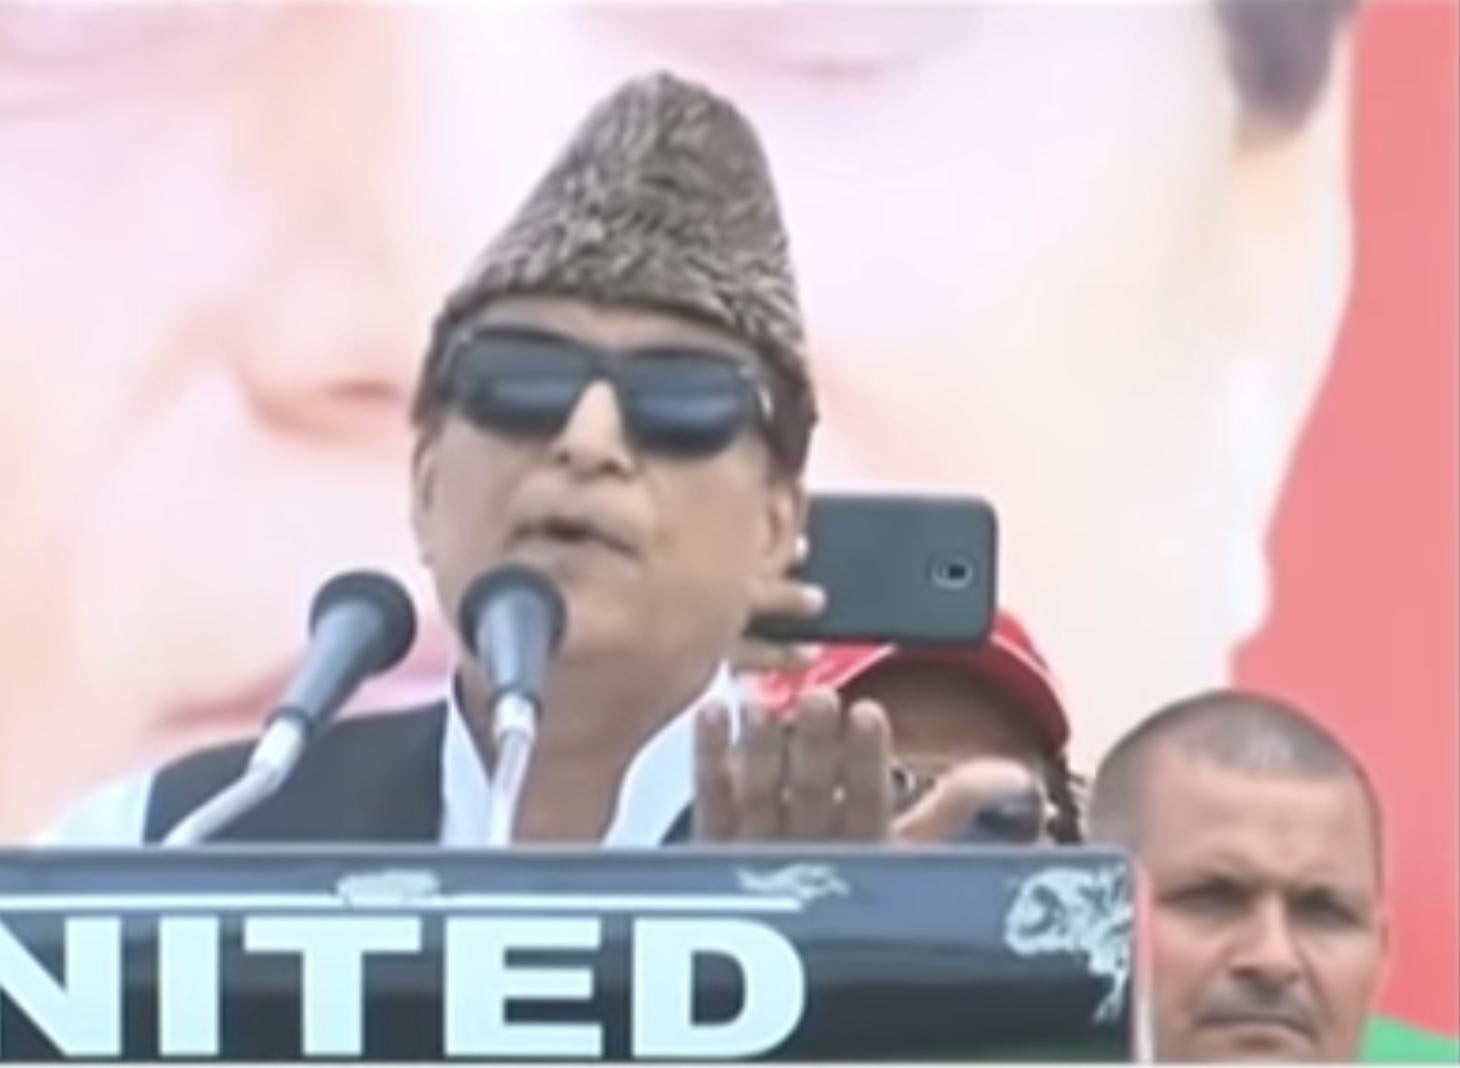 Azam Khan said he ‘knew this person's underwear was khaki’, in what is being interpreted as a comment about his opponent Jaya Prada's right-wing ideology